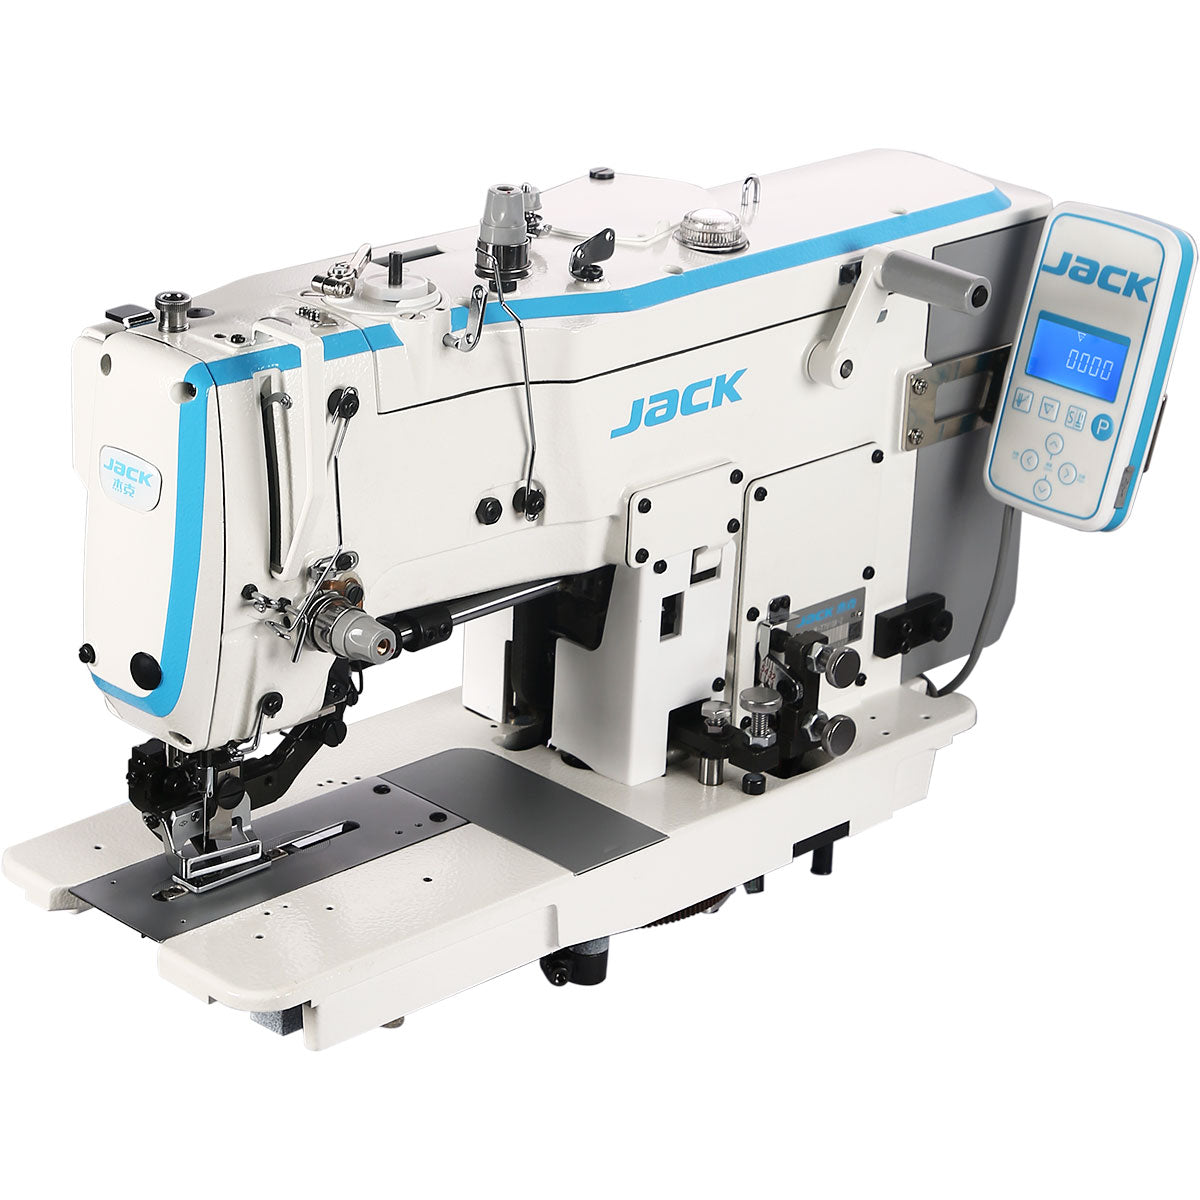 JACK JK-T781G-Z Mechanical Digital Buttonhole Sewing Machine Assembled with Table and Stand Included